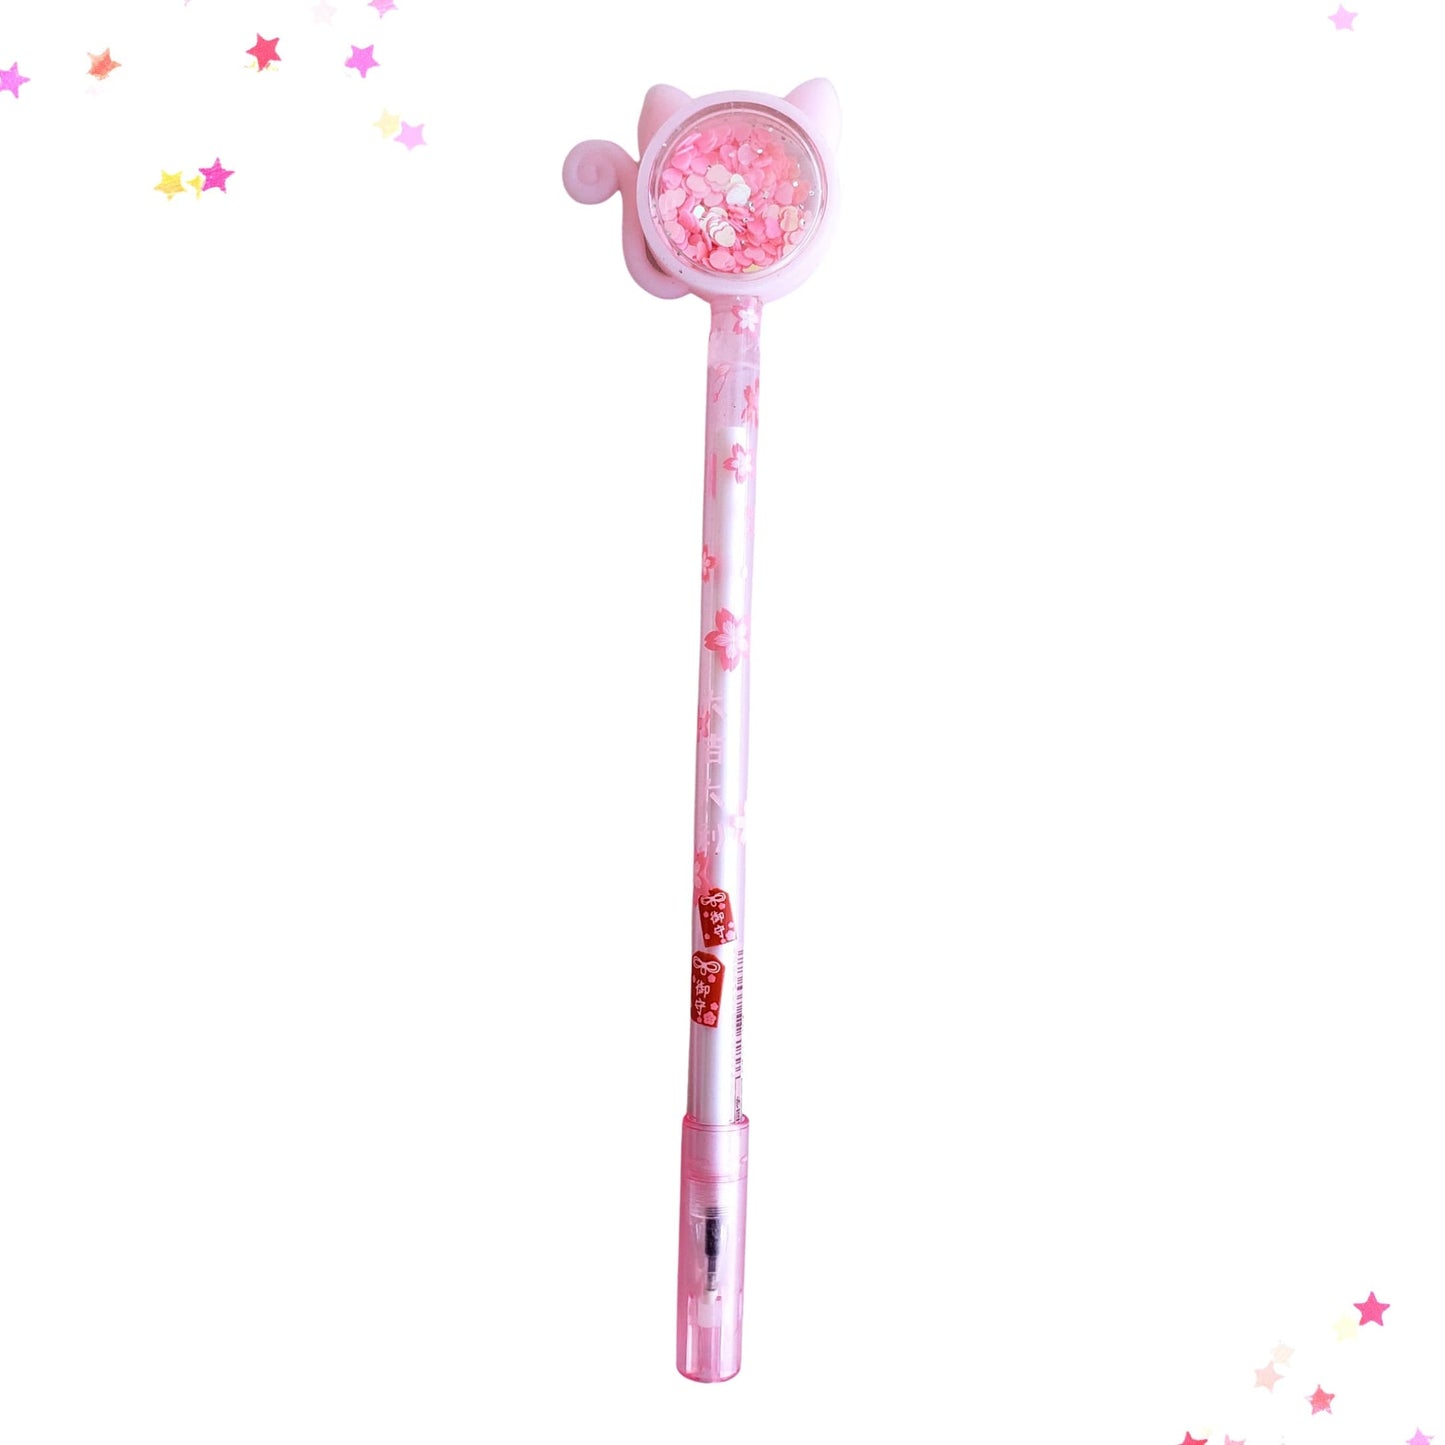 Cat-Shaped Sequin Shaker Gel Pen in Pink from Confetti Kitty, Only 2.99